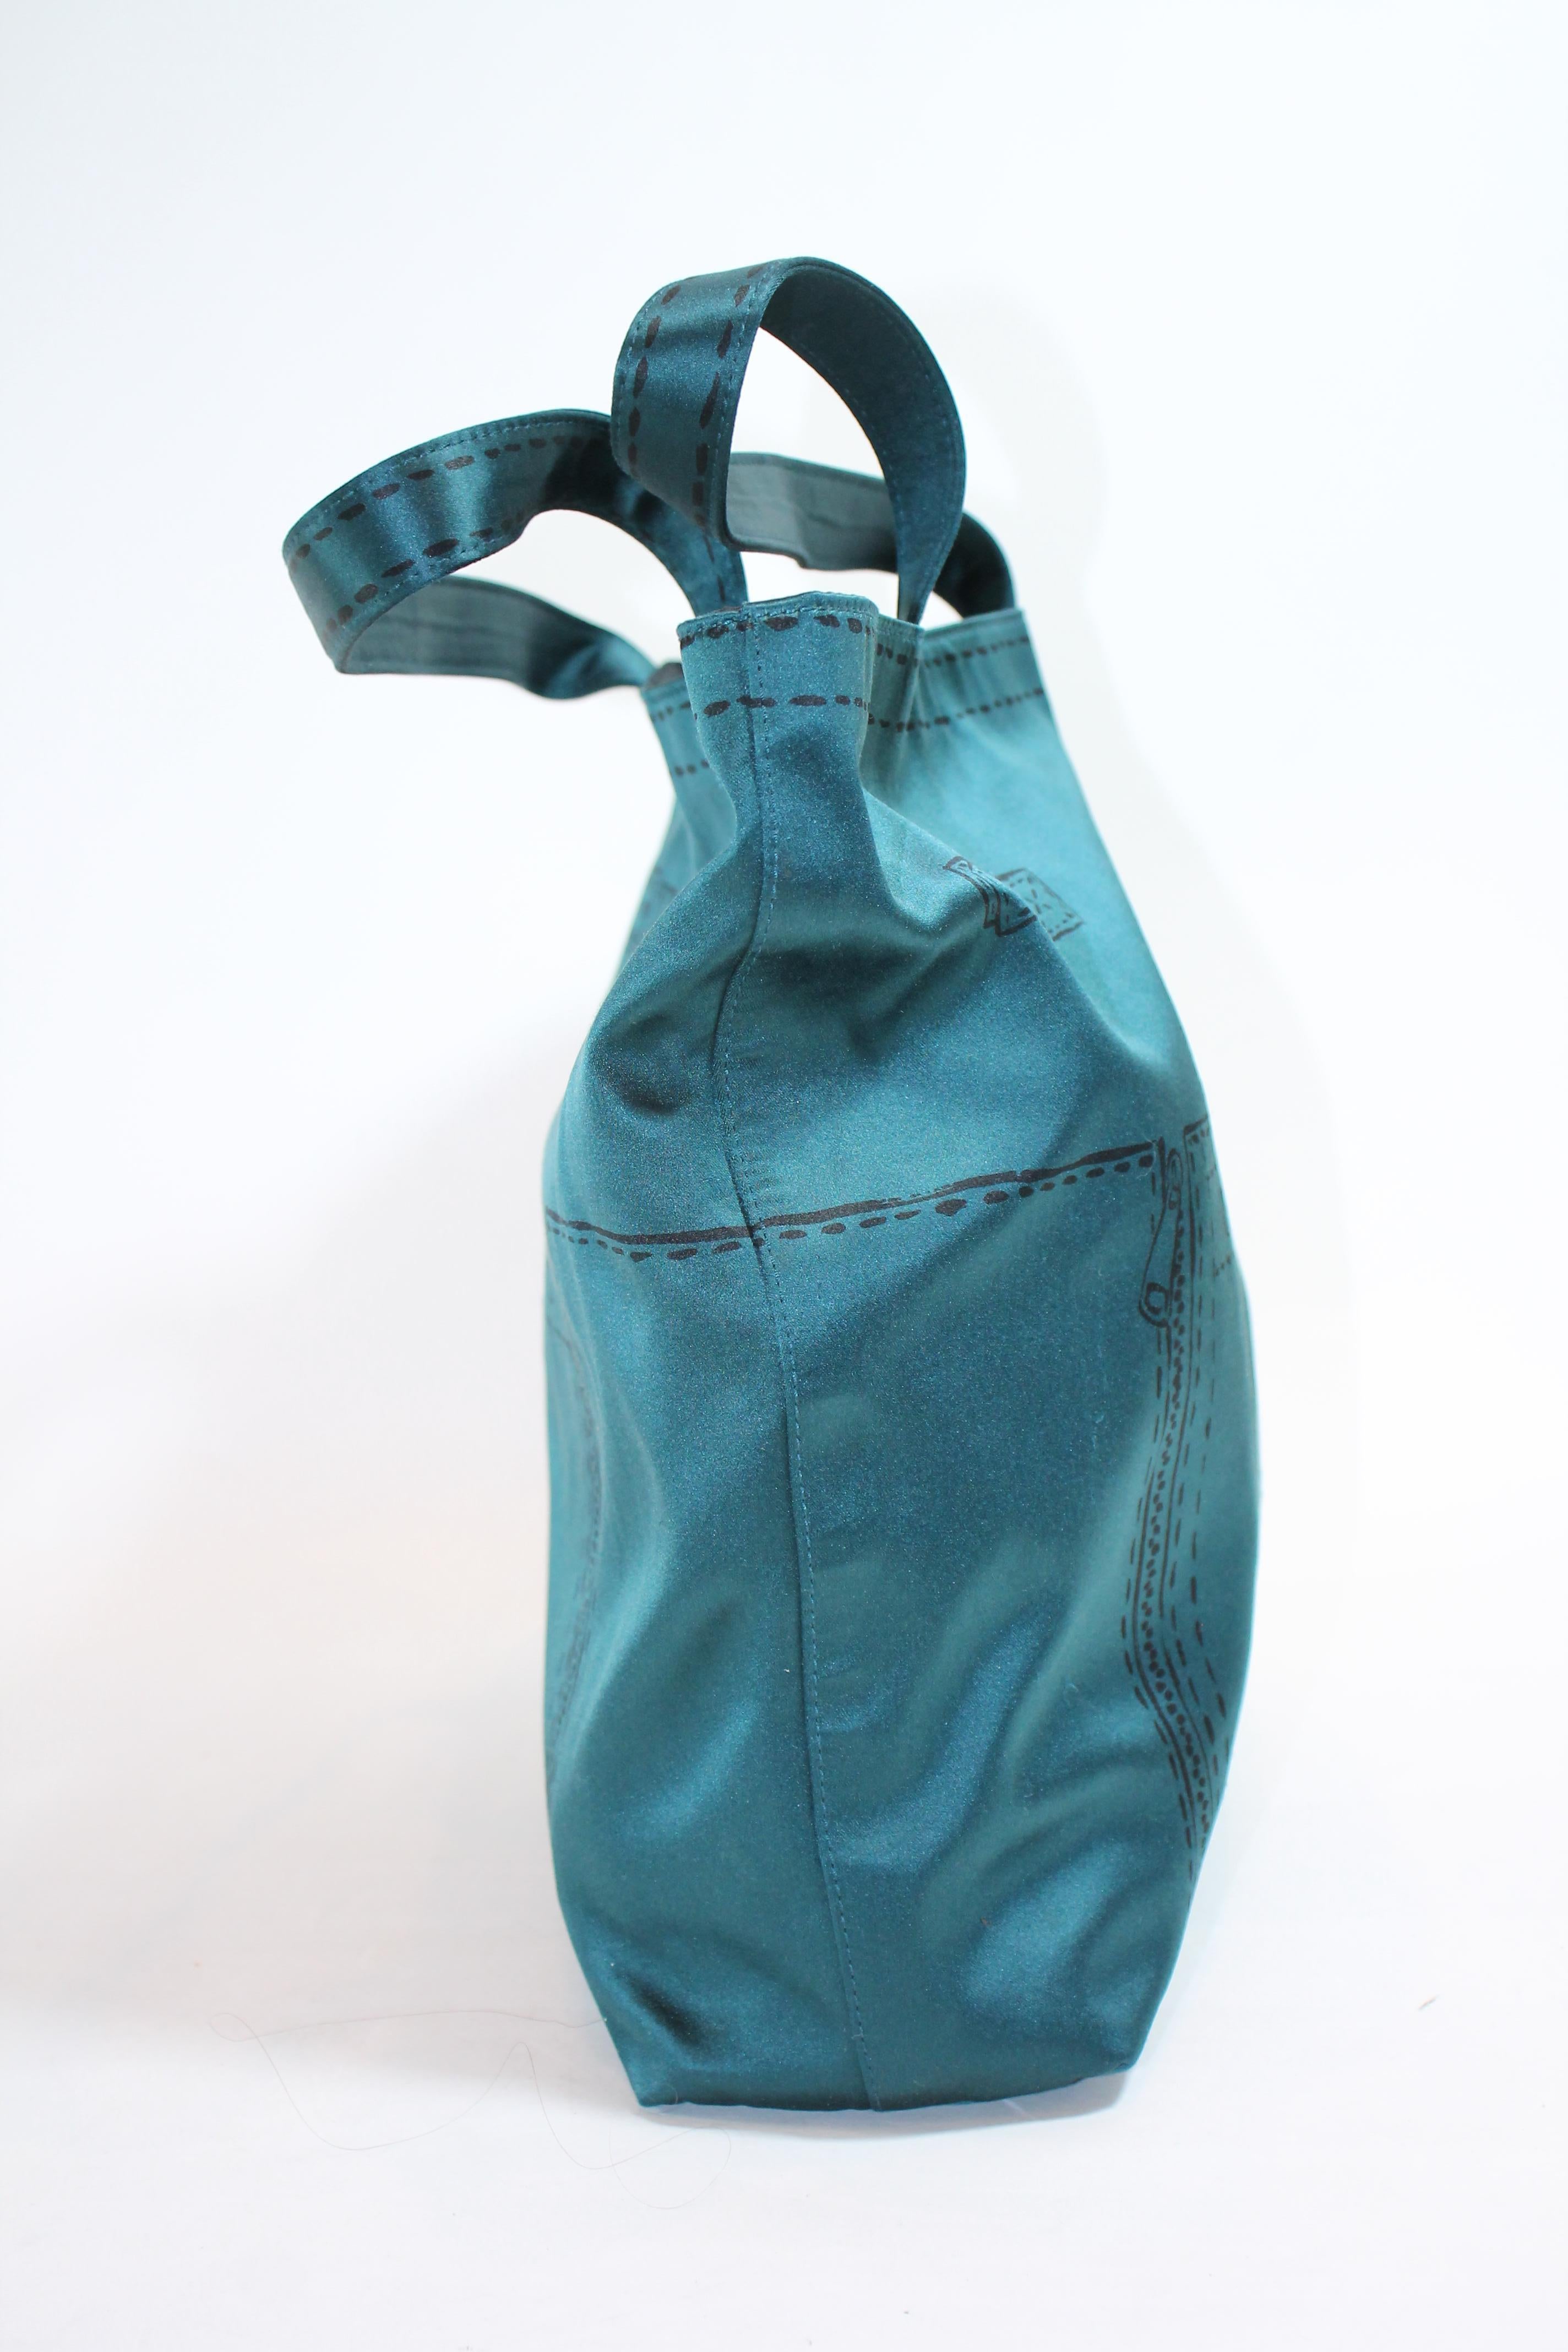 Teal satin featuring the marks of signature side belts and buckles, vertical zippers, and facing pocket. Open top. Dual flat top handles. Satin interior. Two interior opened pockets. One large zippered pocket.